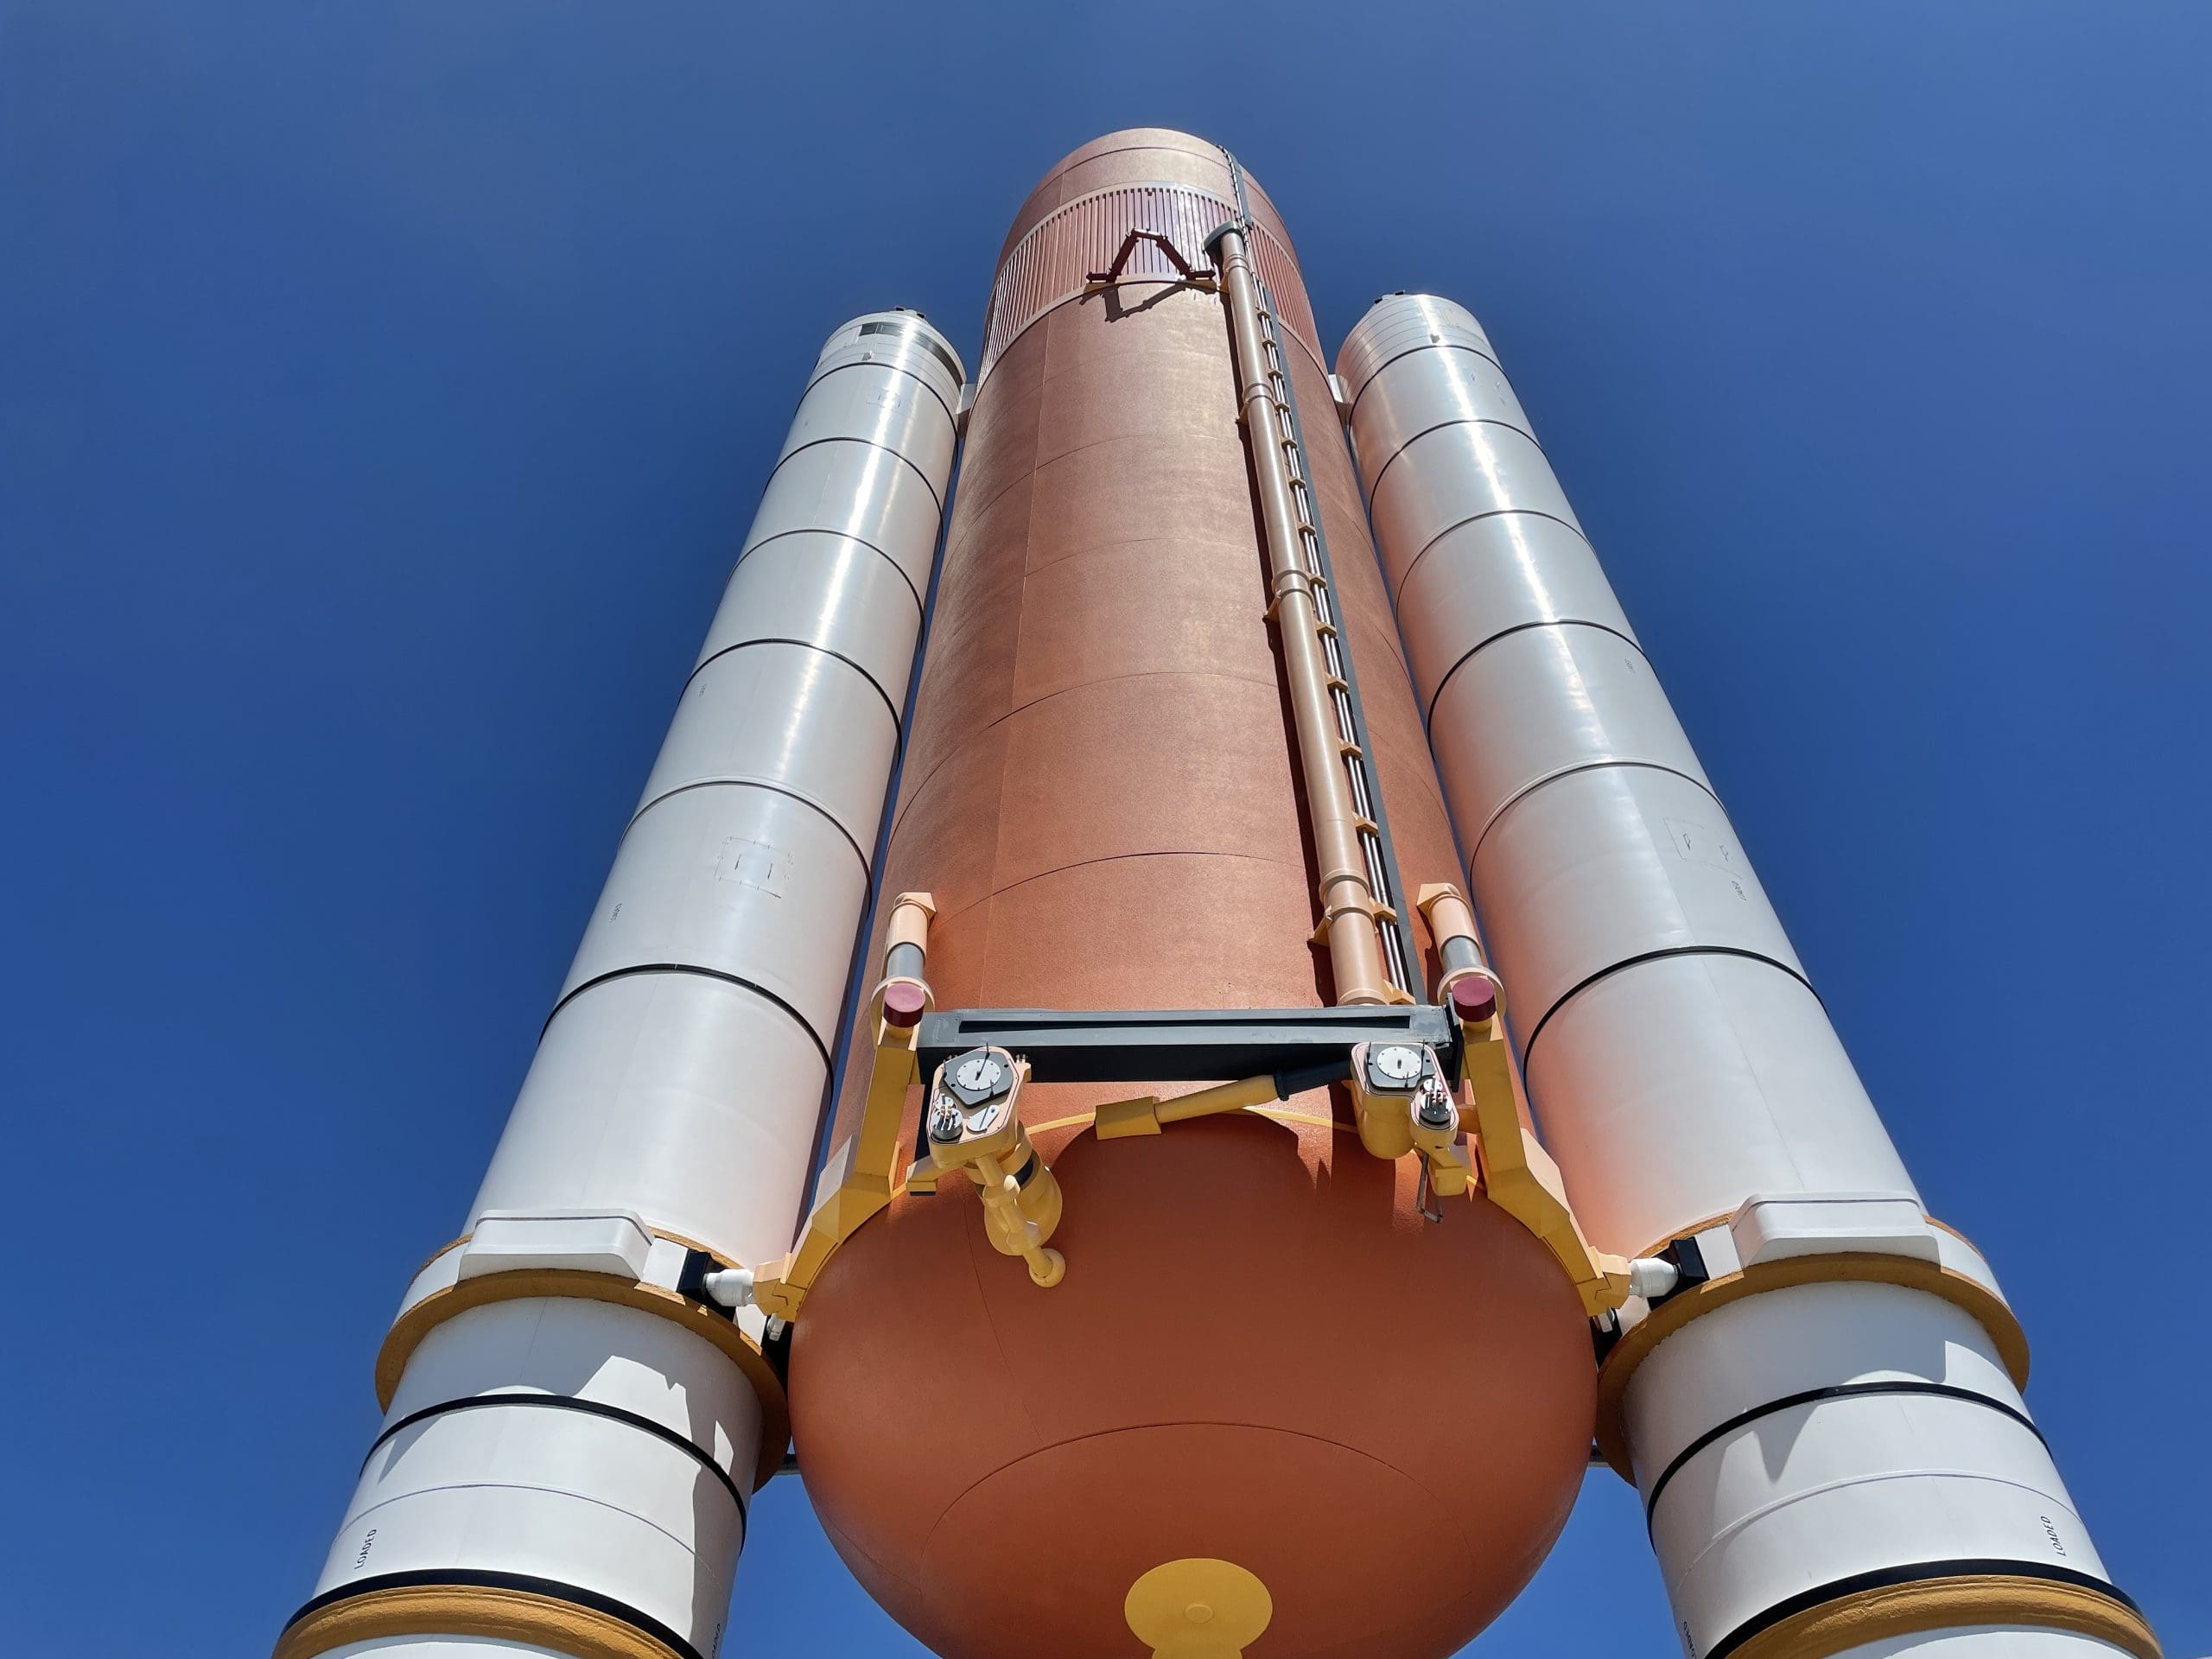 Space Shuttle External Tank and Booster